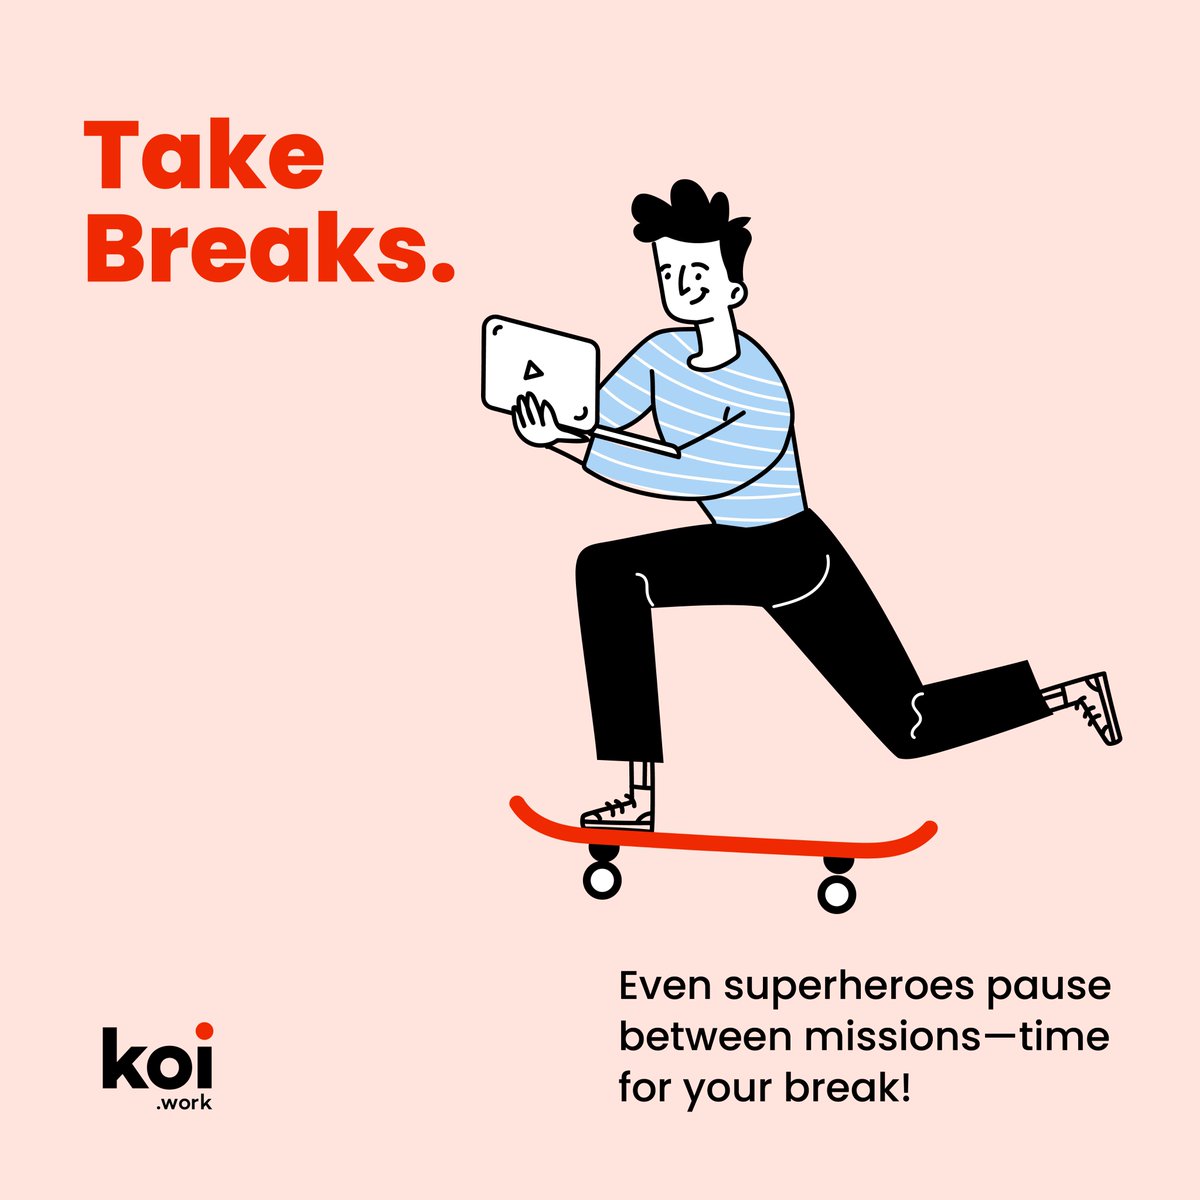 Managing a remote tech team? 

Here are 4 golden tips for striking the perfect work-life balance. Discover top-tier remote tech talent with koi.work and start building your dream team today! 

#RemoteTech #WorkLifeBalance #HiringNow #RemoteWorkforce